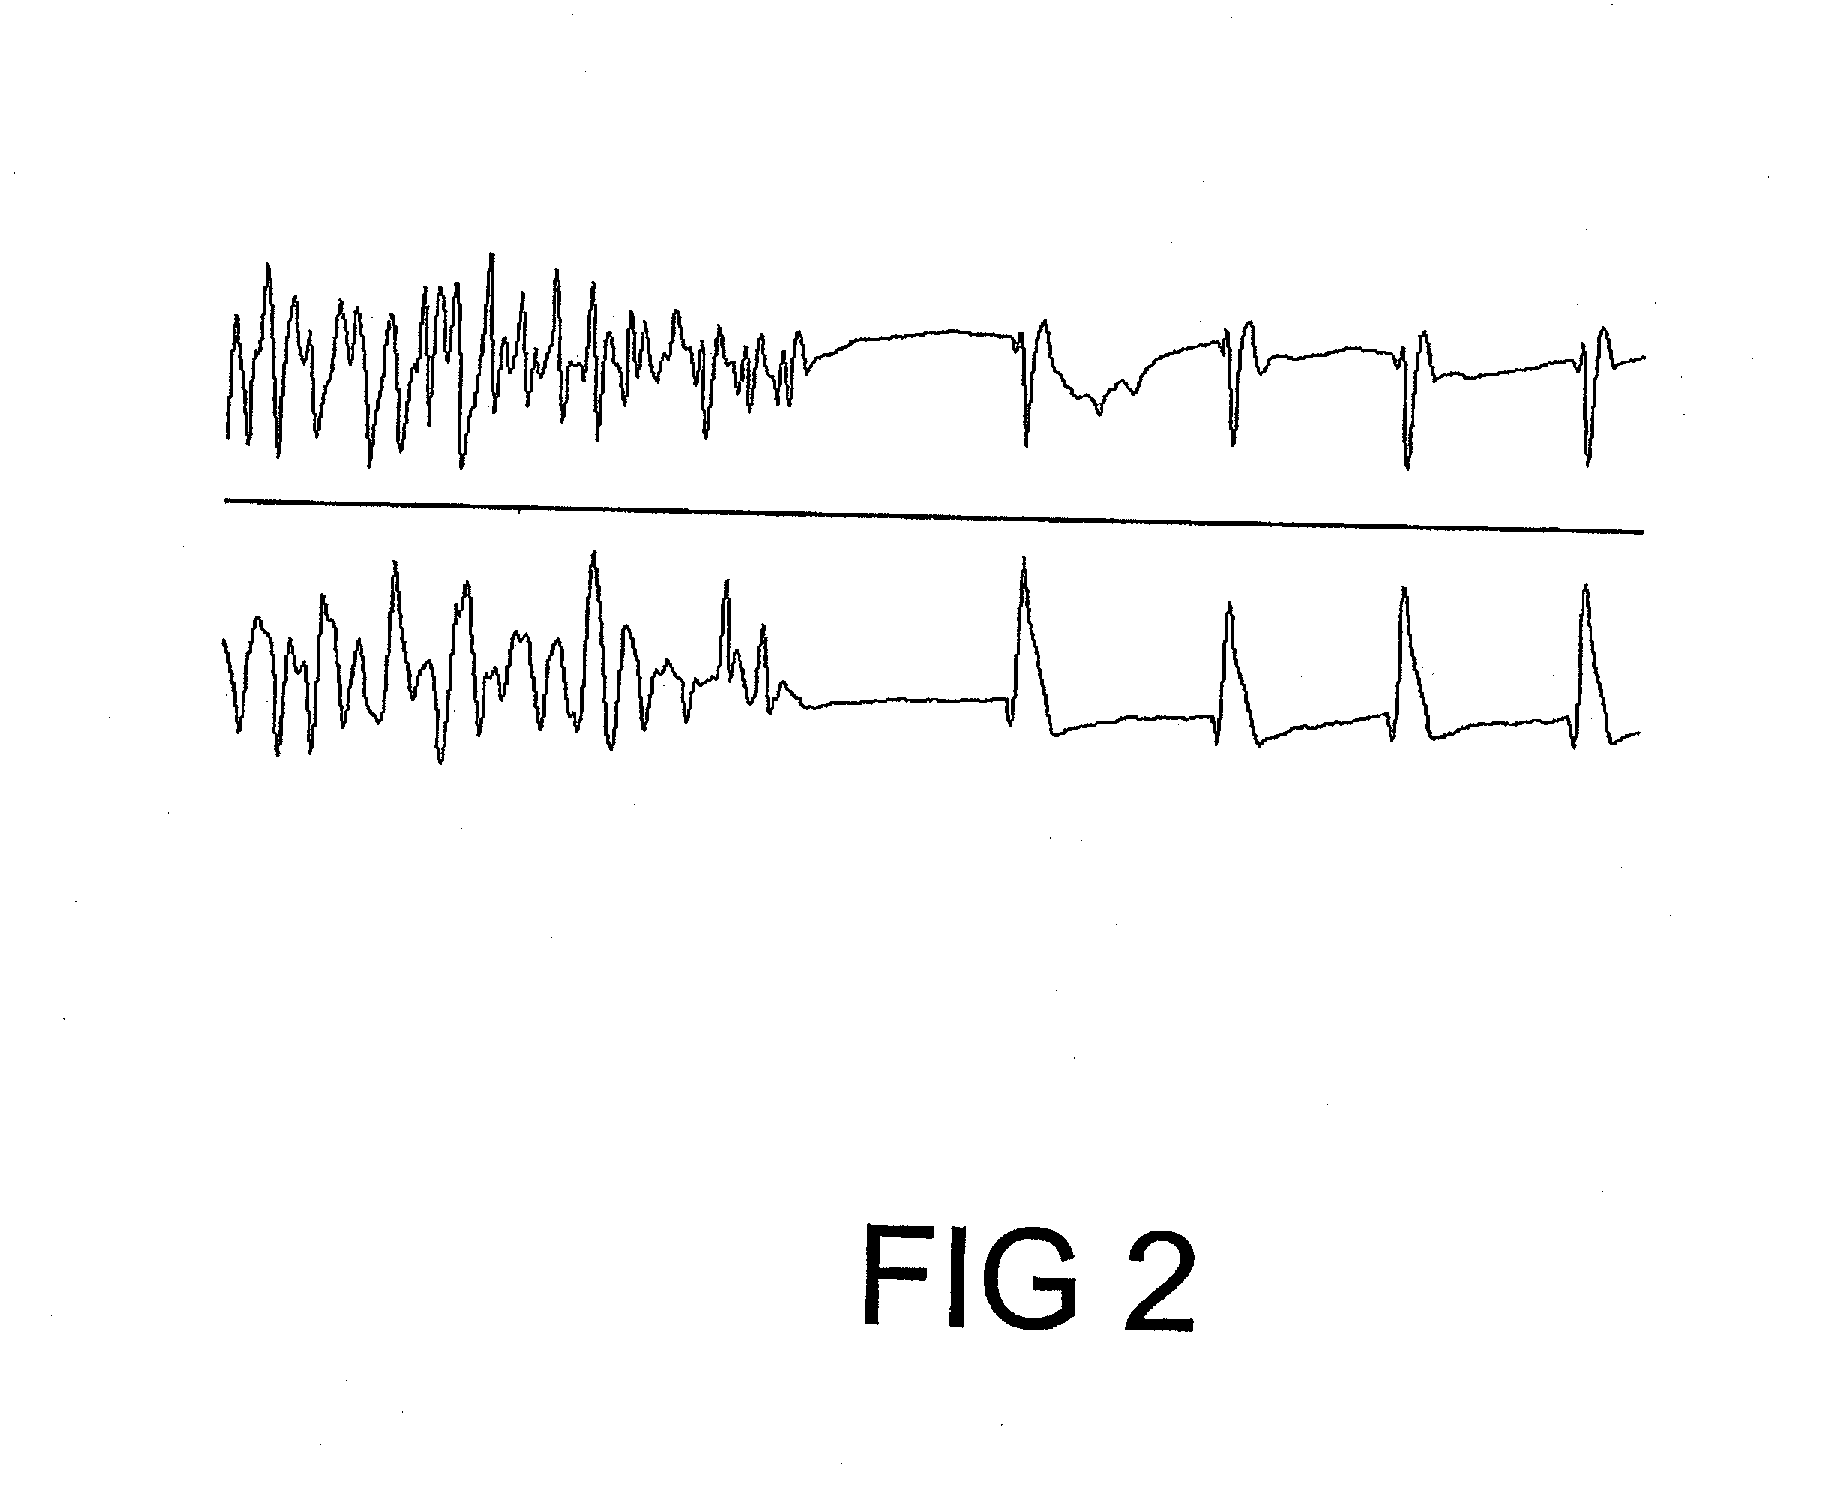 Pharmaceutical composition comprising plant material or trichilia sp. alone or in association with other plant extracts for the reversion/combat and/or prevention of ventricular fibrillation